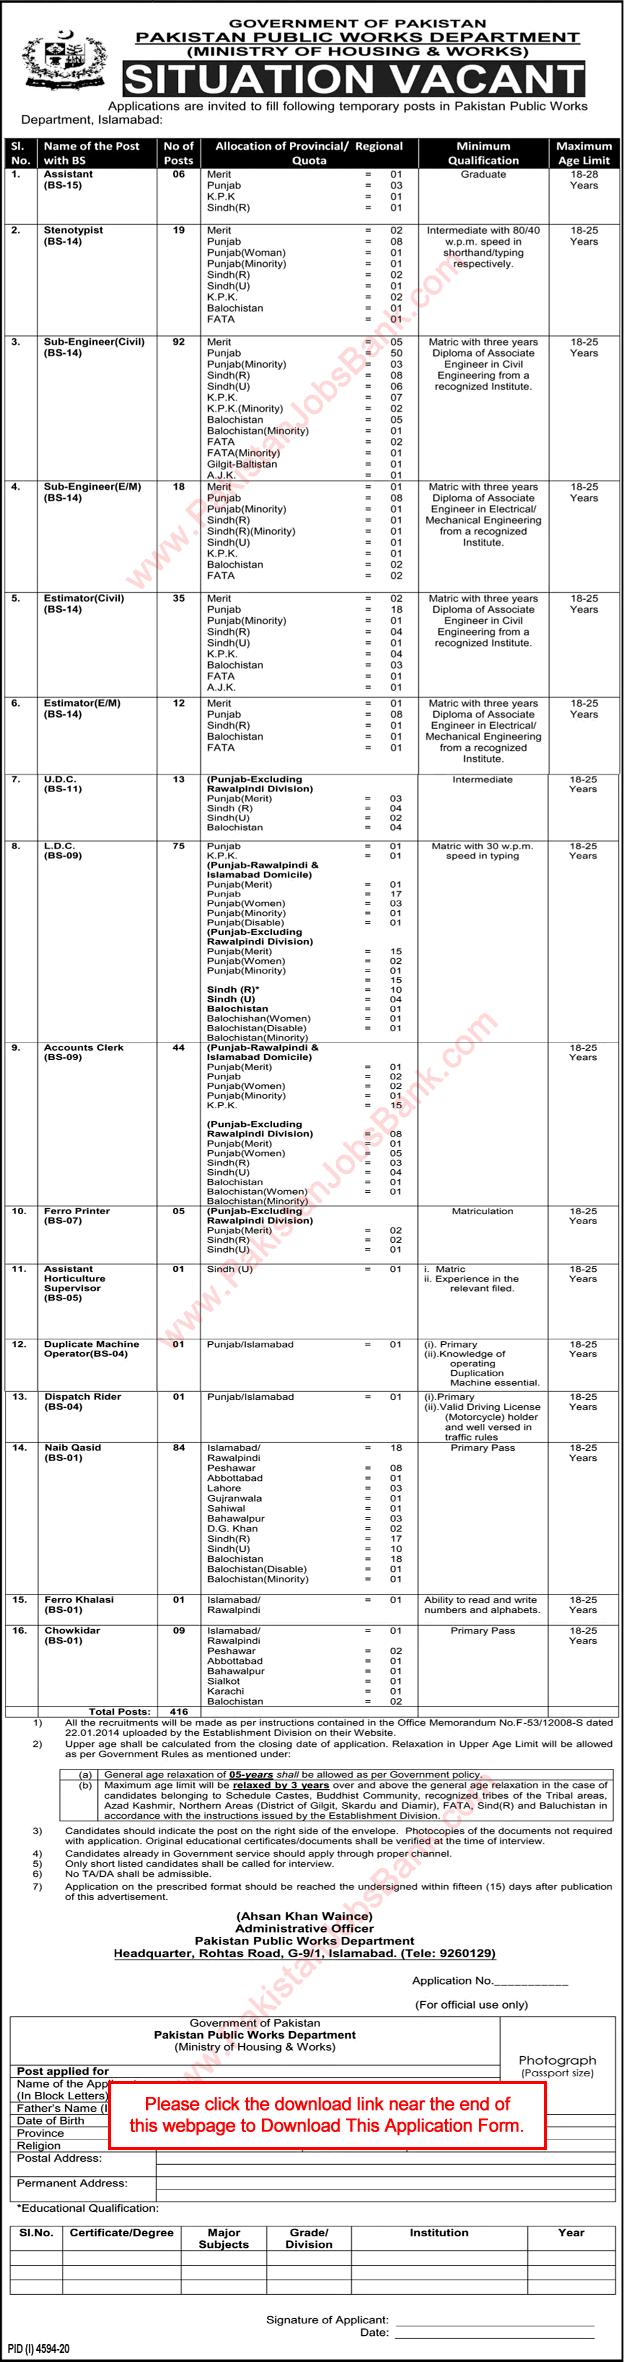 Pakistan Public Works Department Jobs 2021 February Pak PWD Application Form Sub Engineers, Clerks & Others Latest